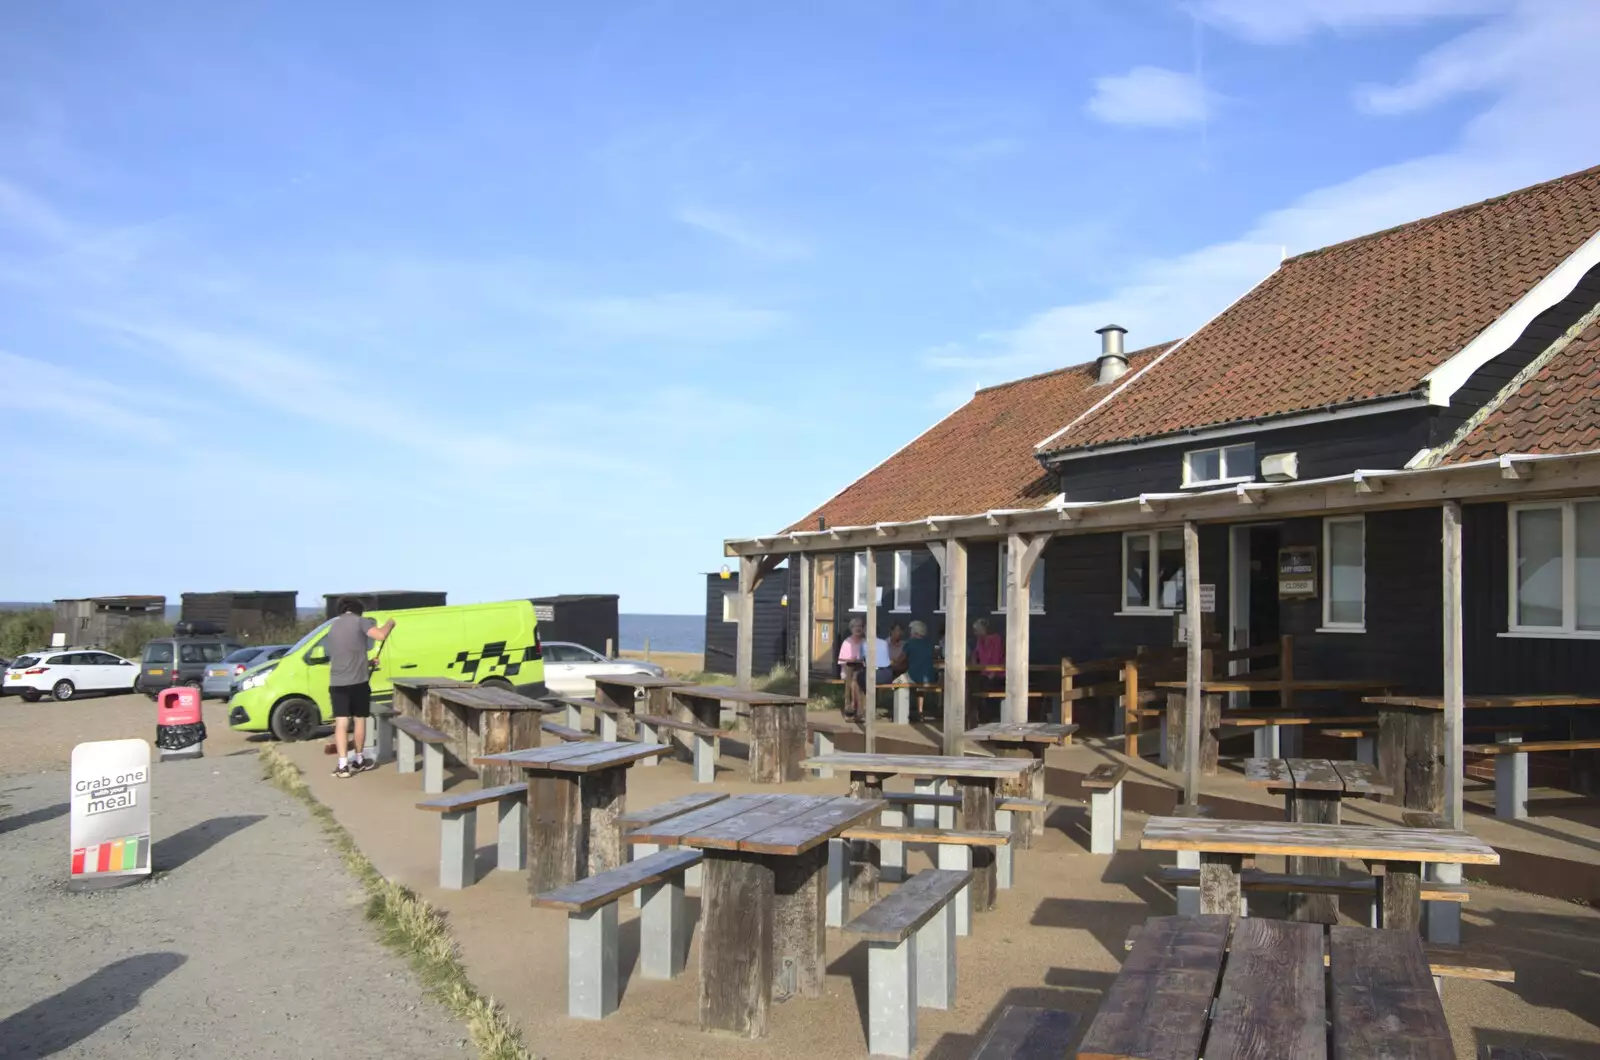 It's closing time at the Dunwich café, from A Cambridge Reunion on the Beach, Dunwich, Suffolk - 23rd August 2023